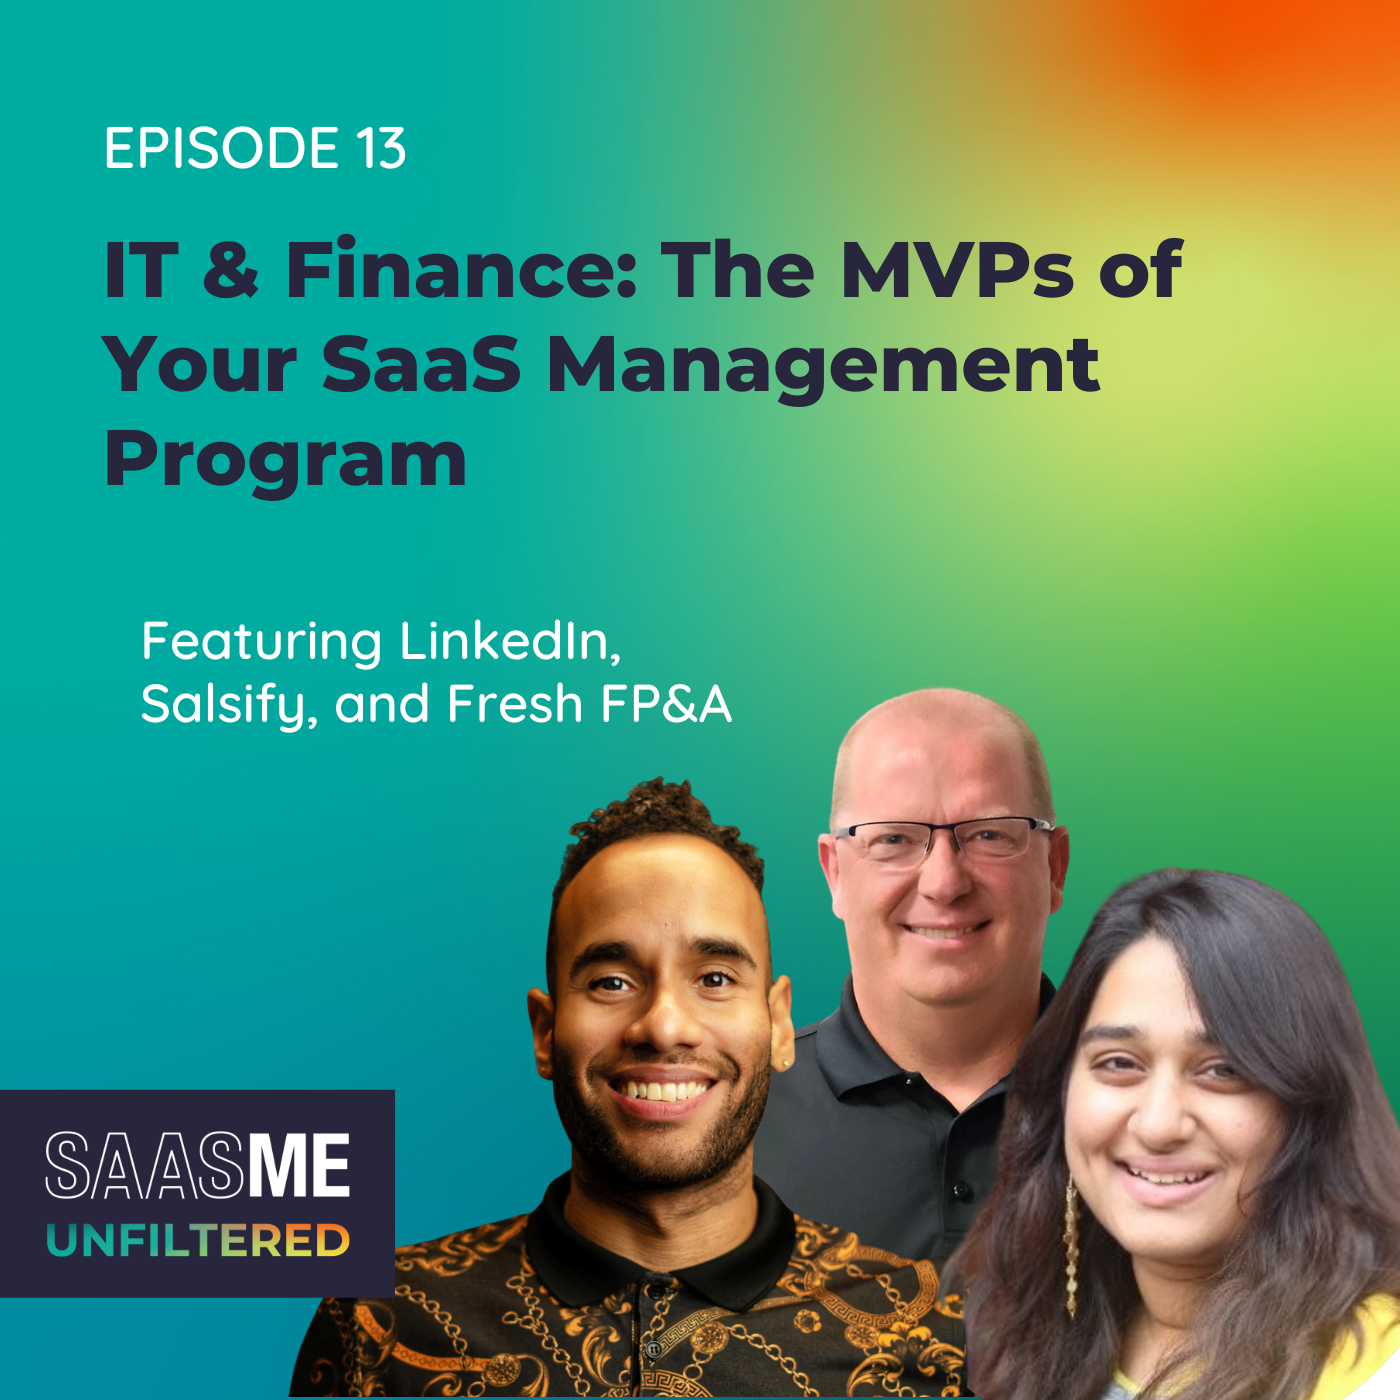 IT & Finance: The MVPs of Your SaaS Management Program